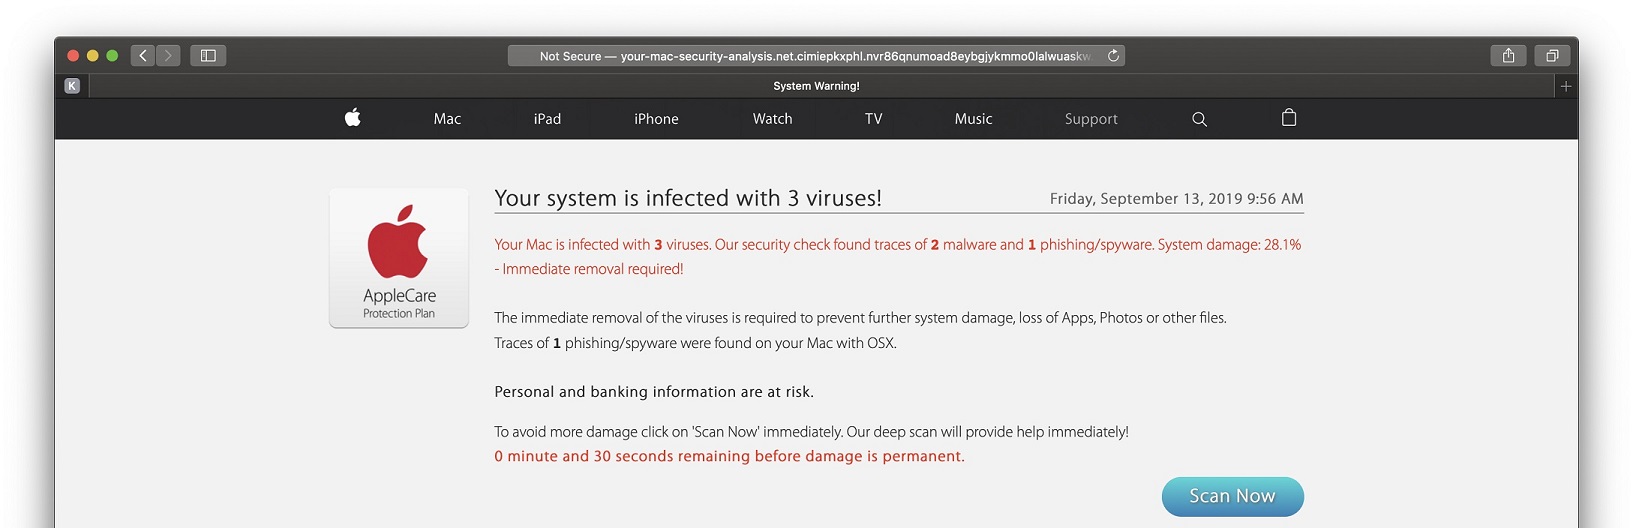 Your System is Infected with 3 Viruses